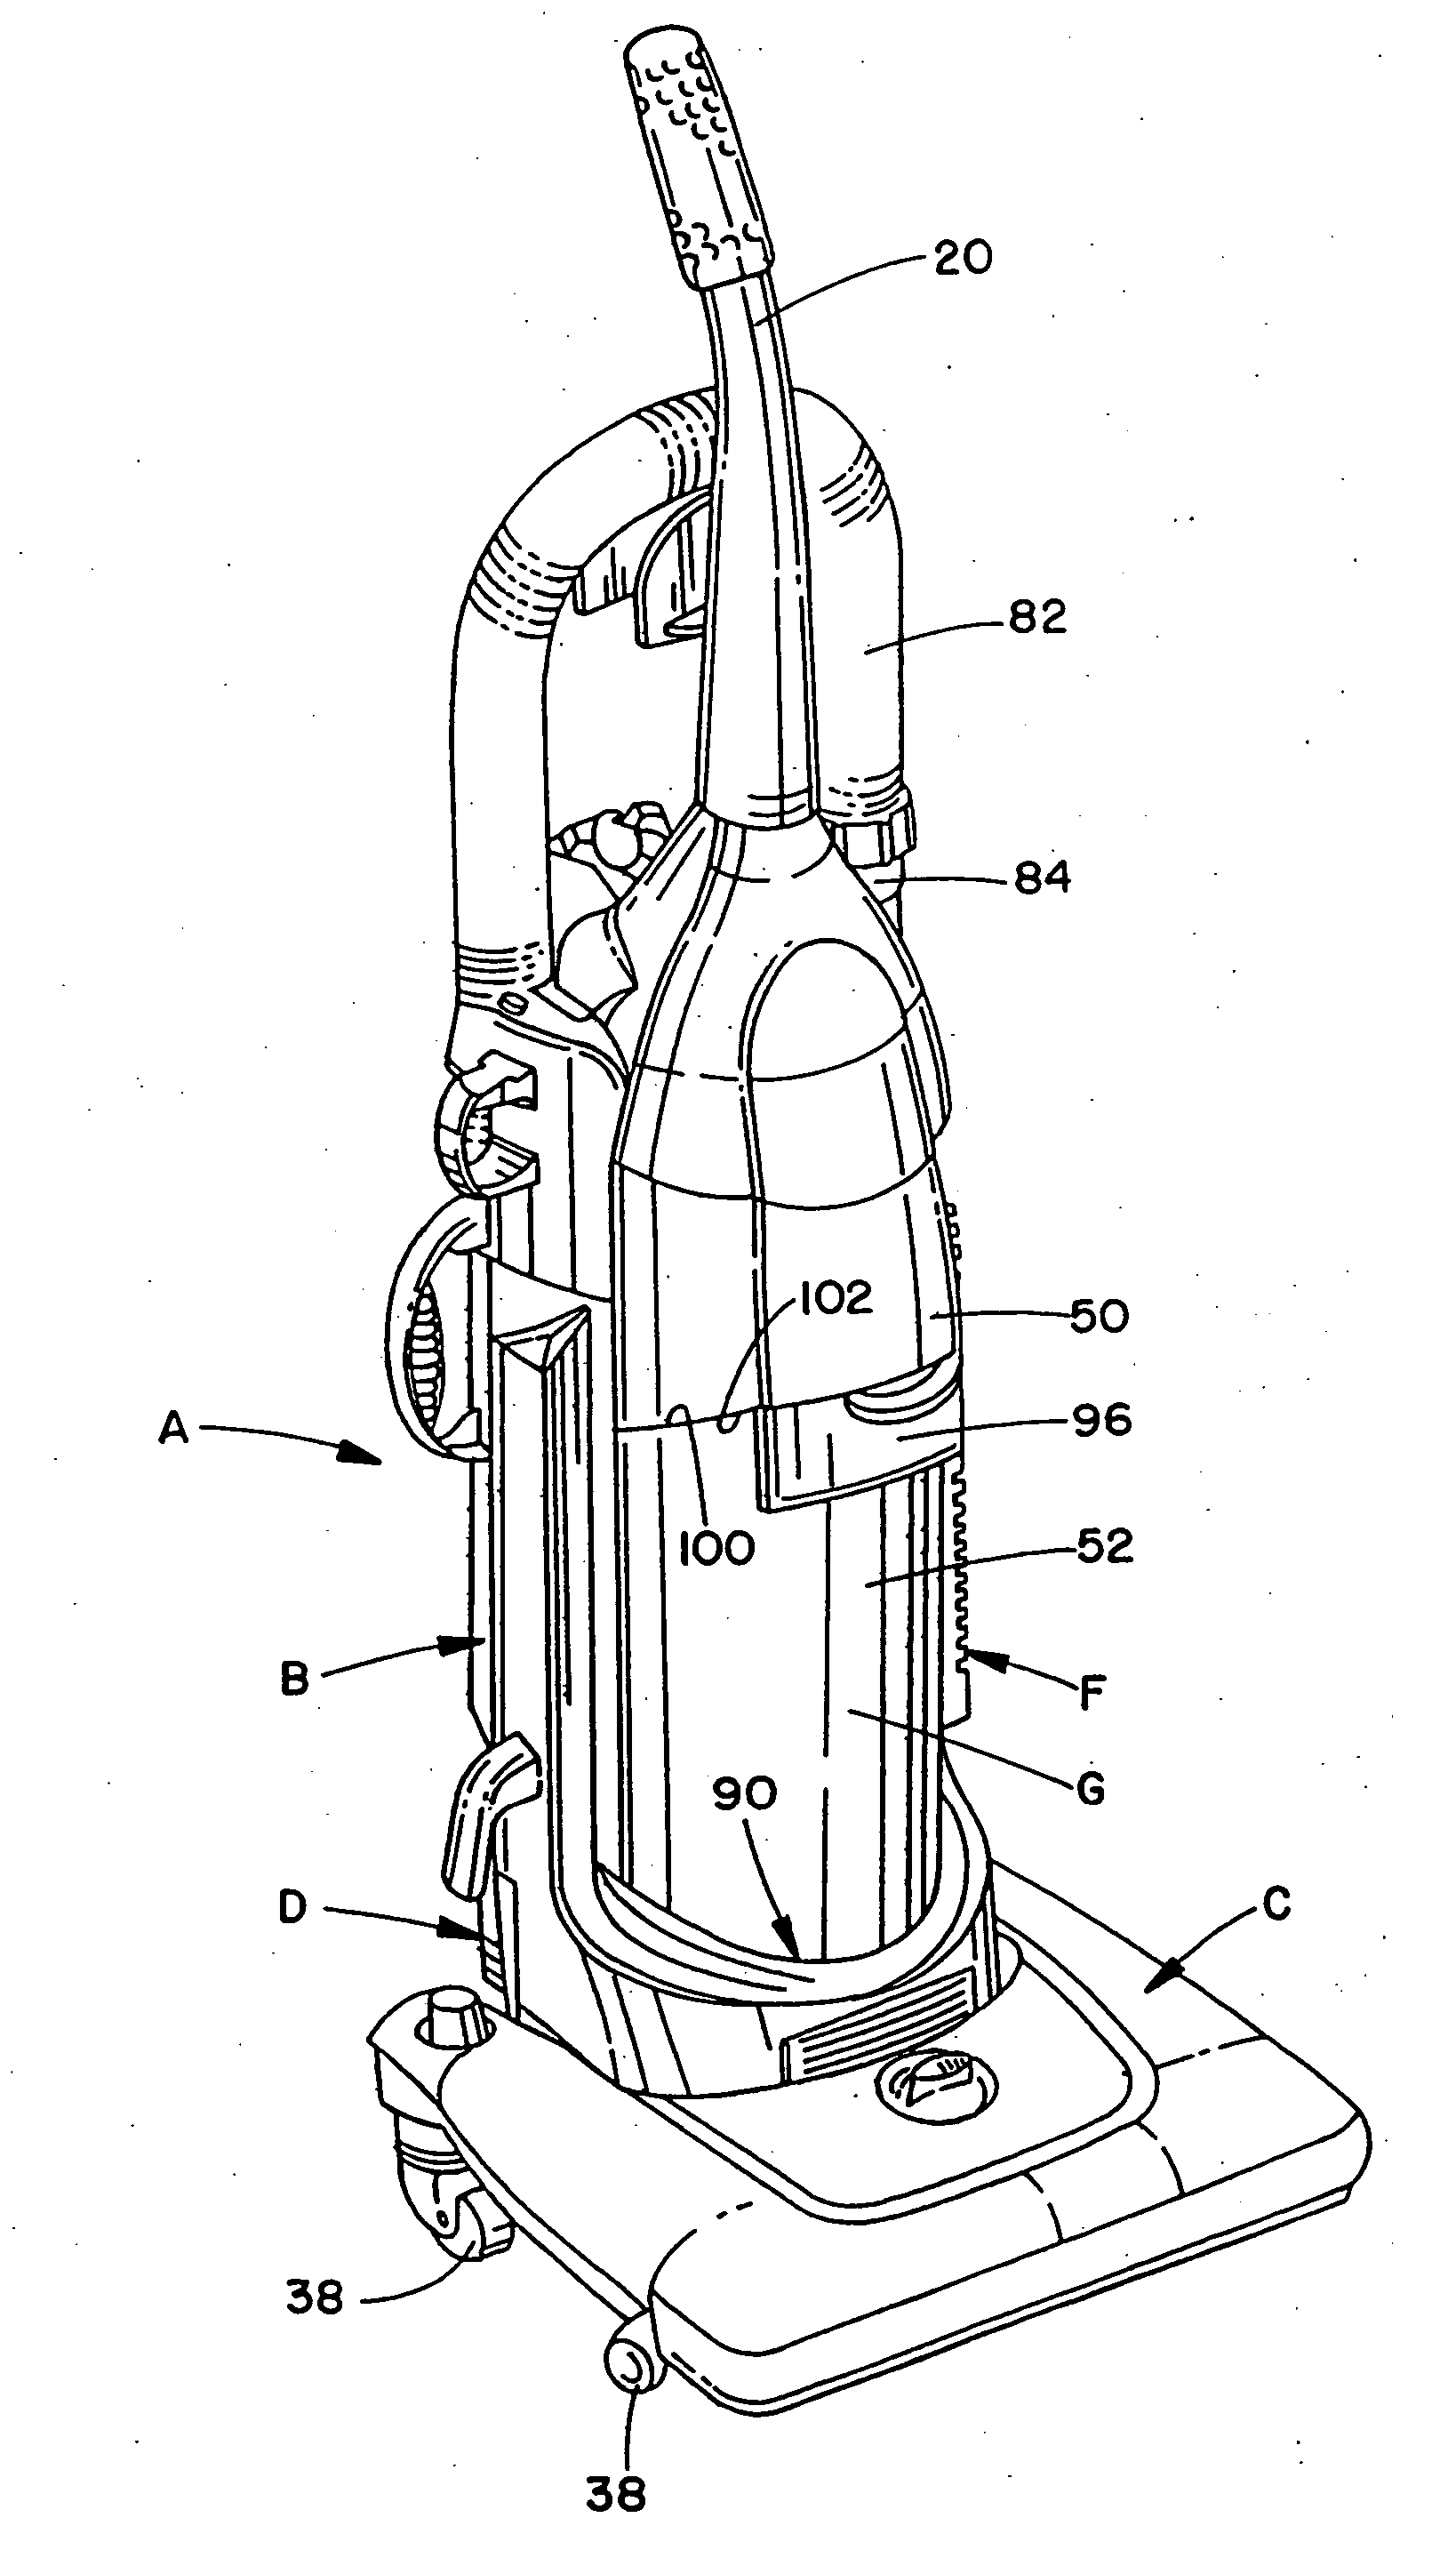 Upright vacuum cleaner with cyclonic air flow